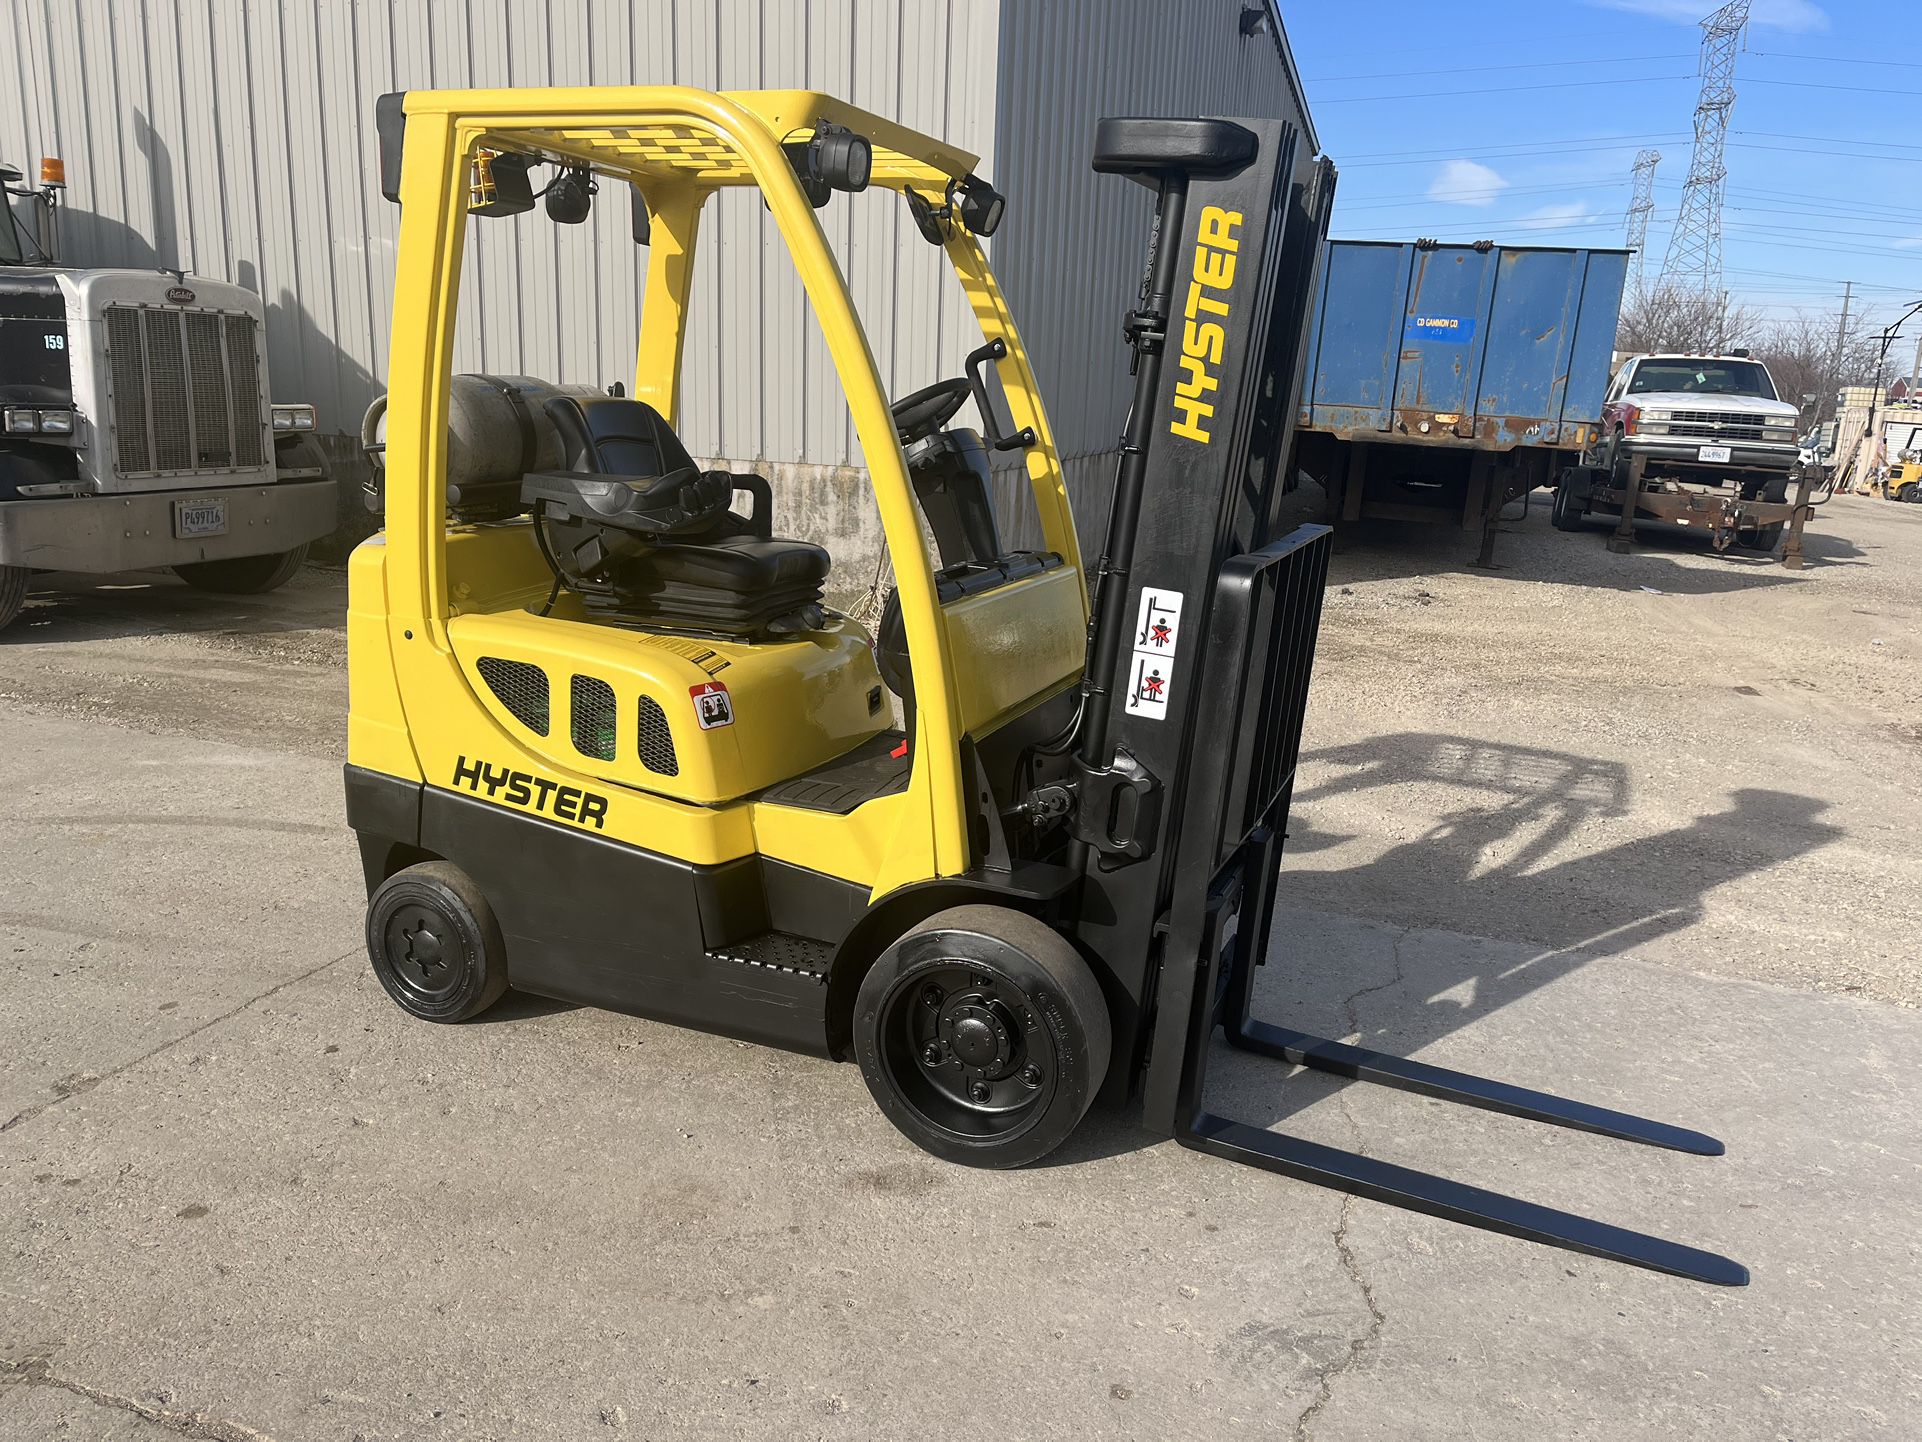 FOR SALE A HYSTER S50FT  FORKLIFT SERÍAL NUMBER F187V23217L (2013) 83 TSU/188” FF WITH SIDESHIFT,OHG,P/S,LPG,AUTO TRANS. FINGERTIP HYDRAULICS. IT IS I